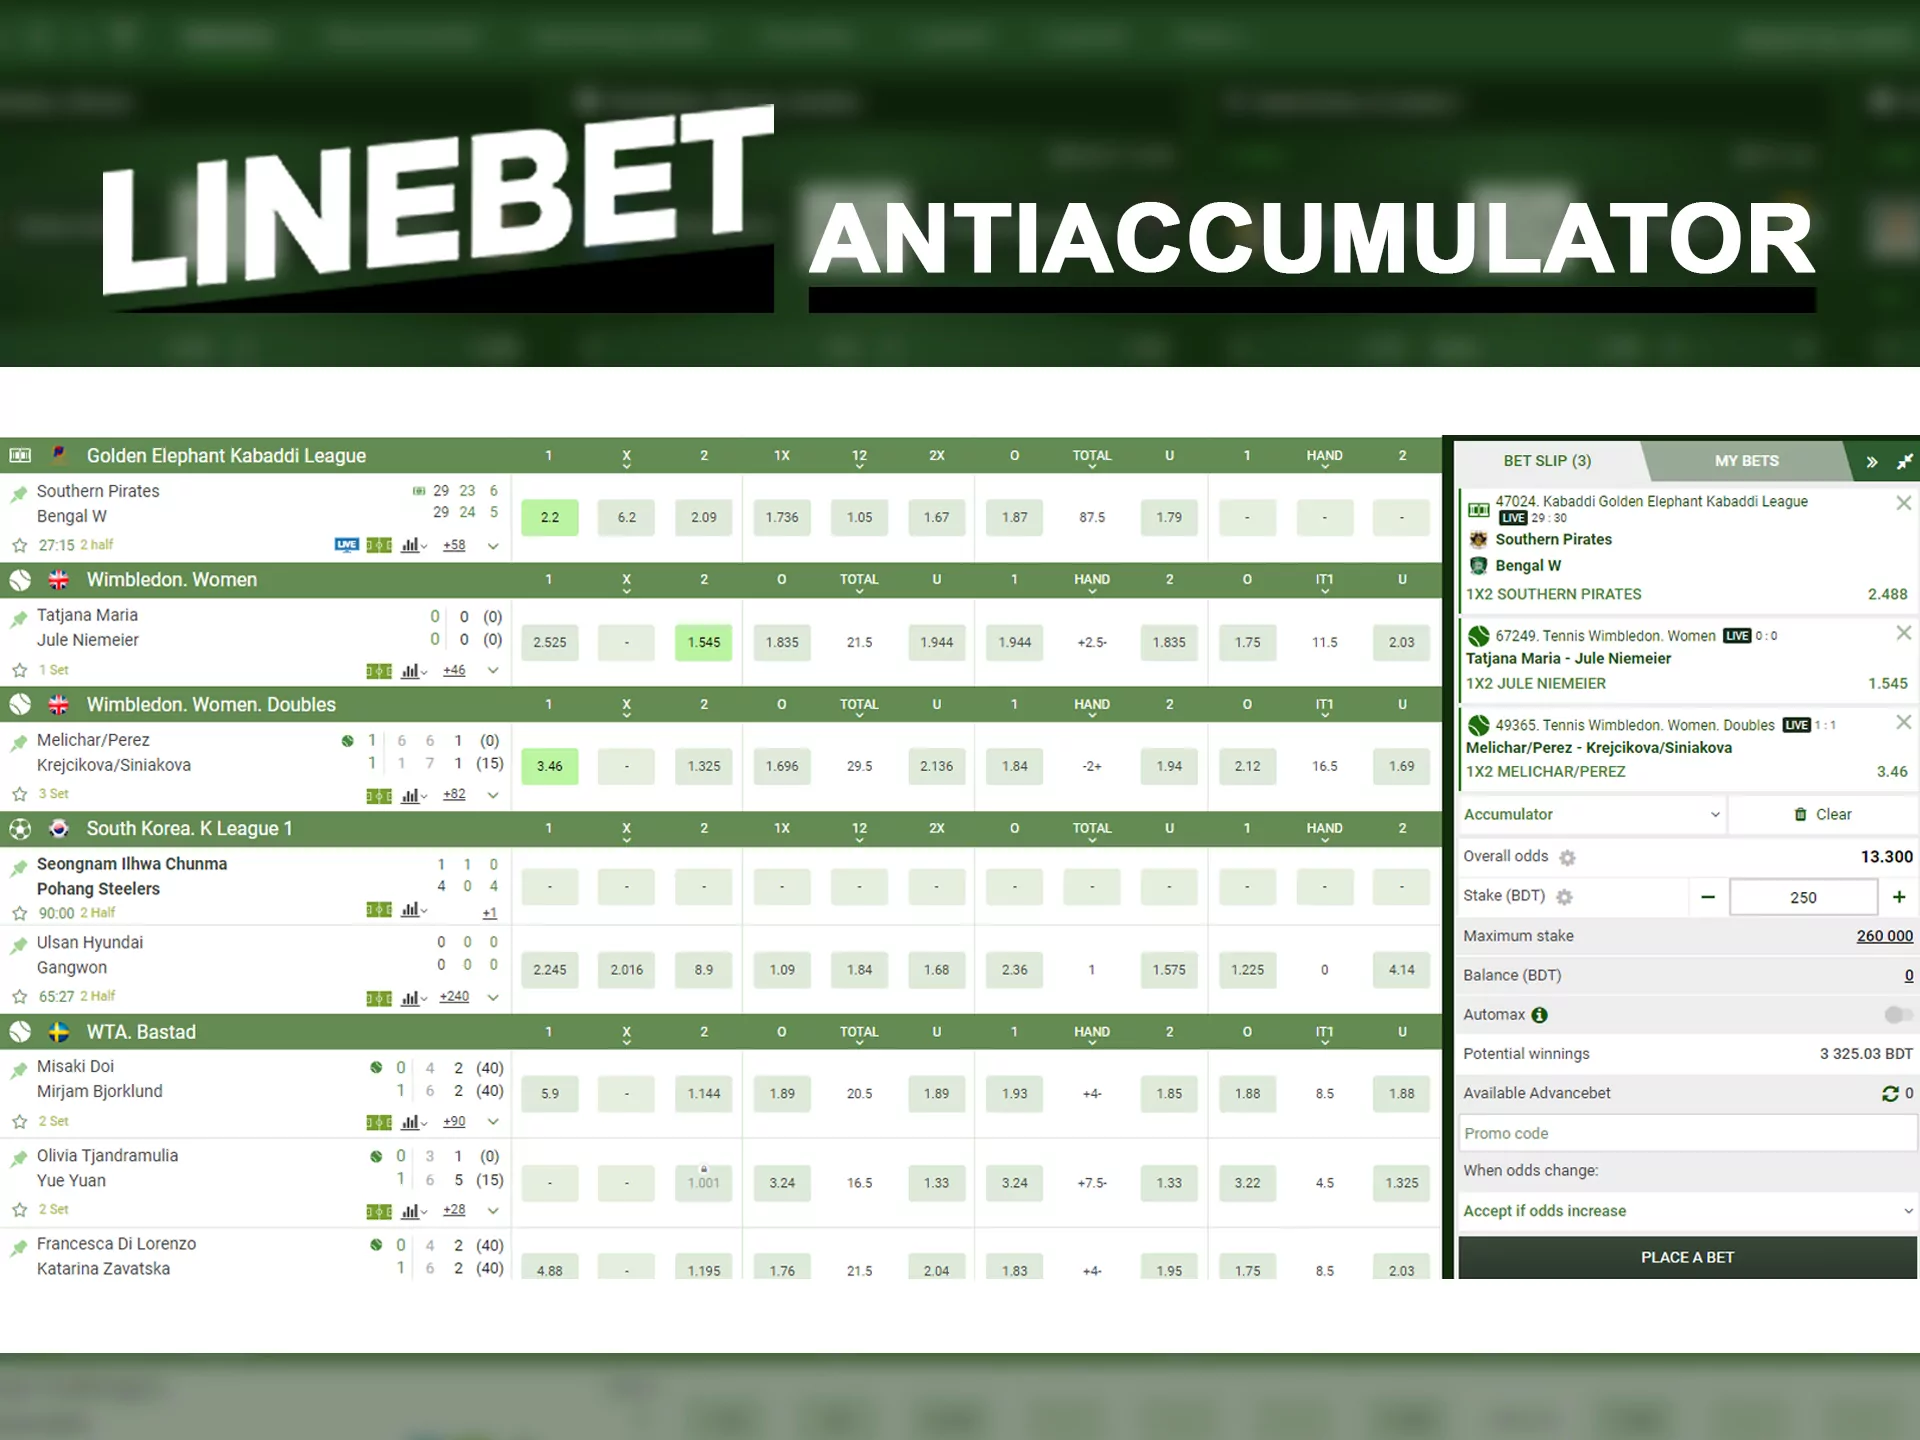 If your sure that you can win, bet as antiaccumulator.